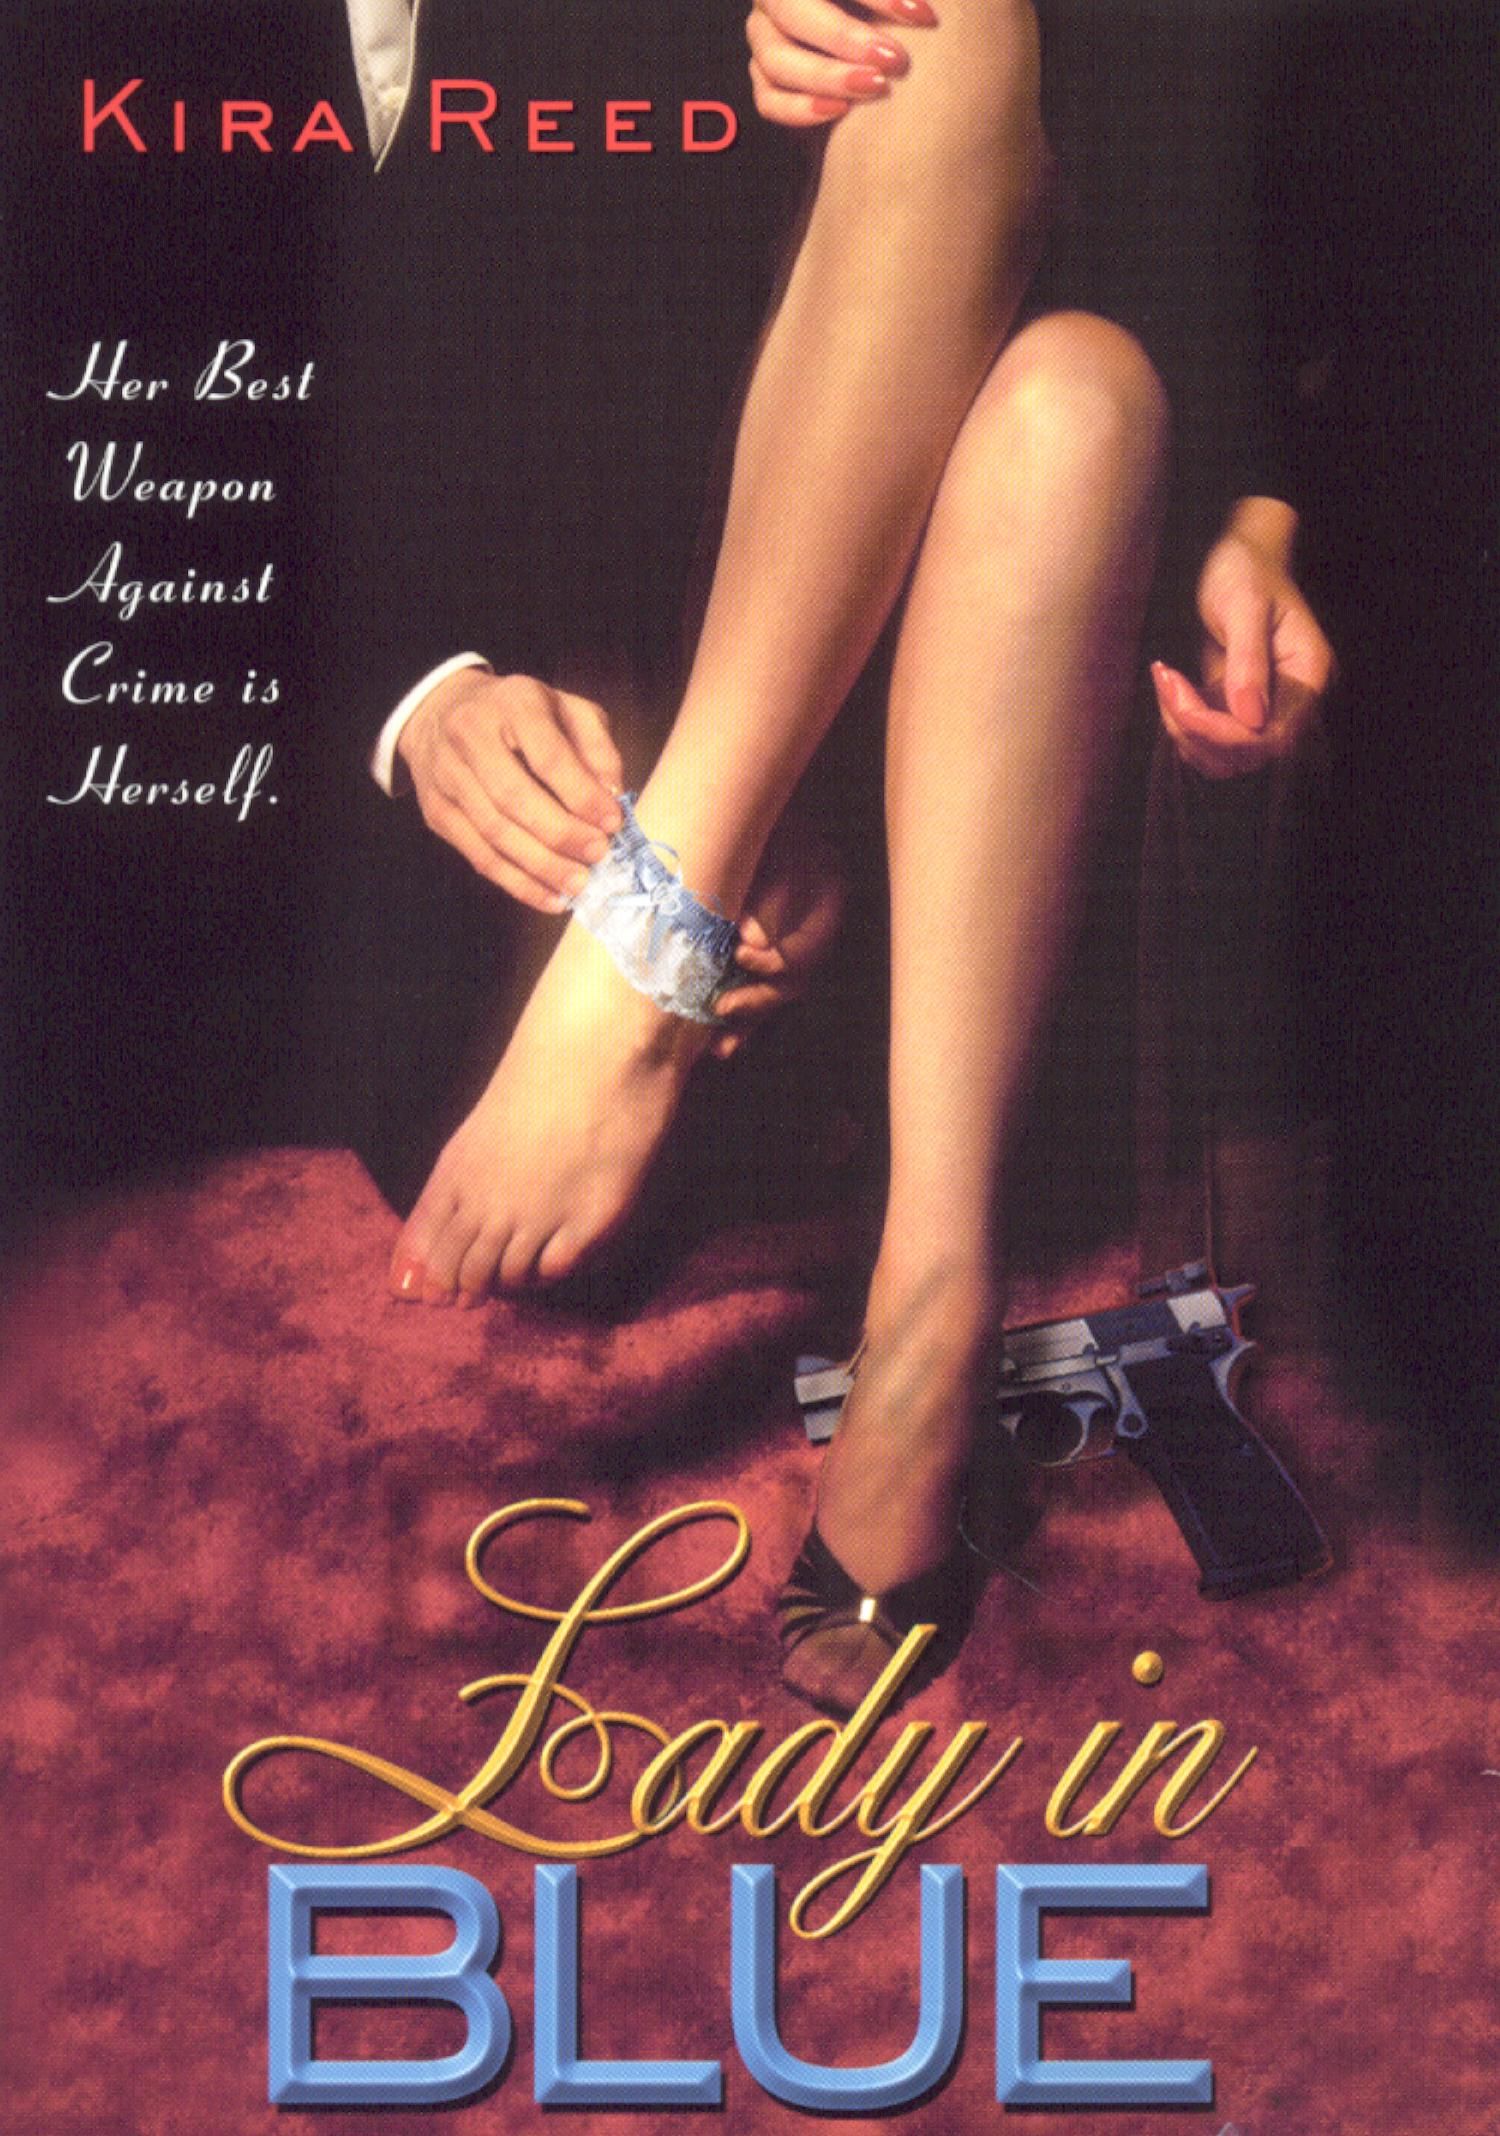 The Lady in Blue (1996) Screenshot 2